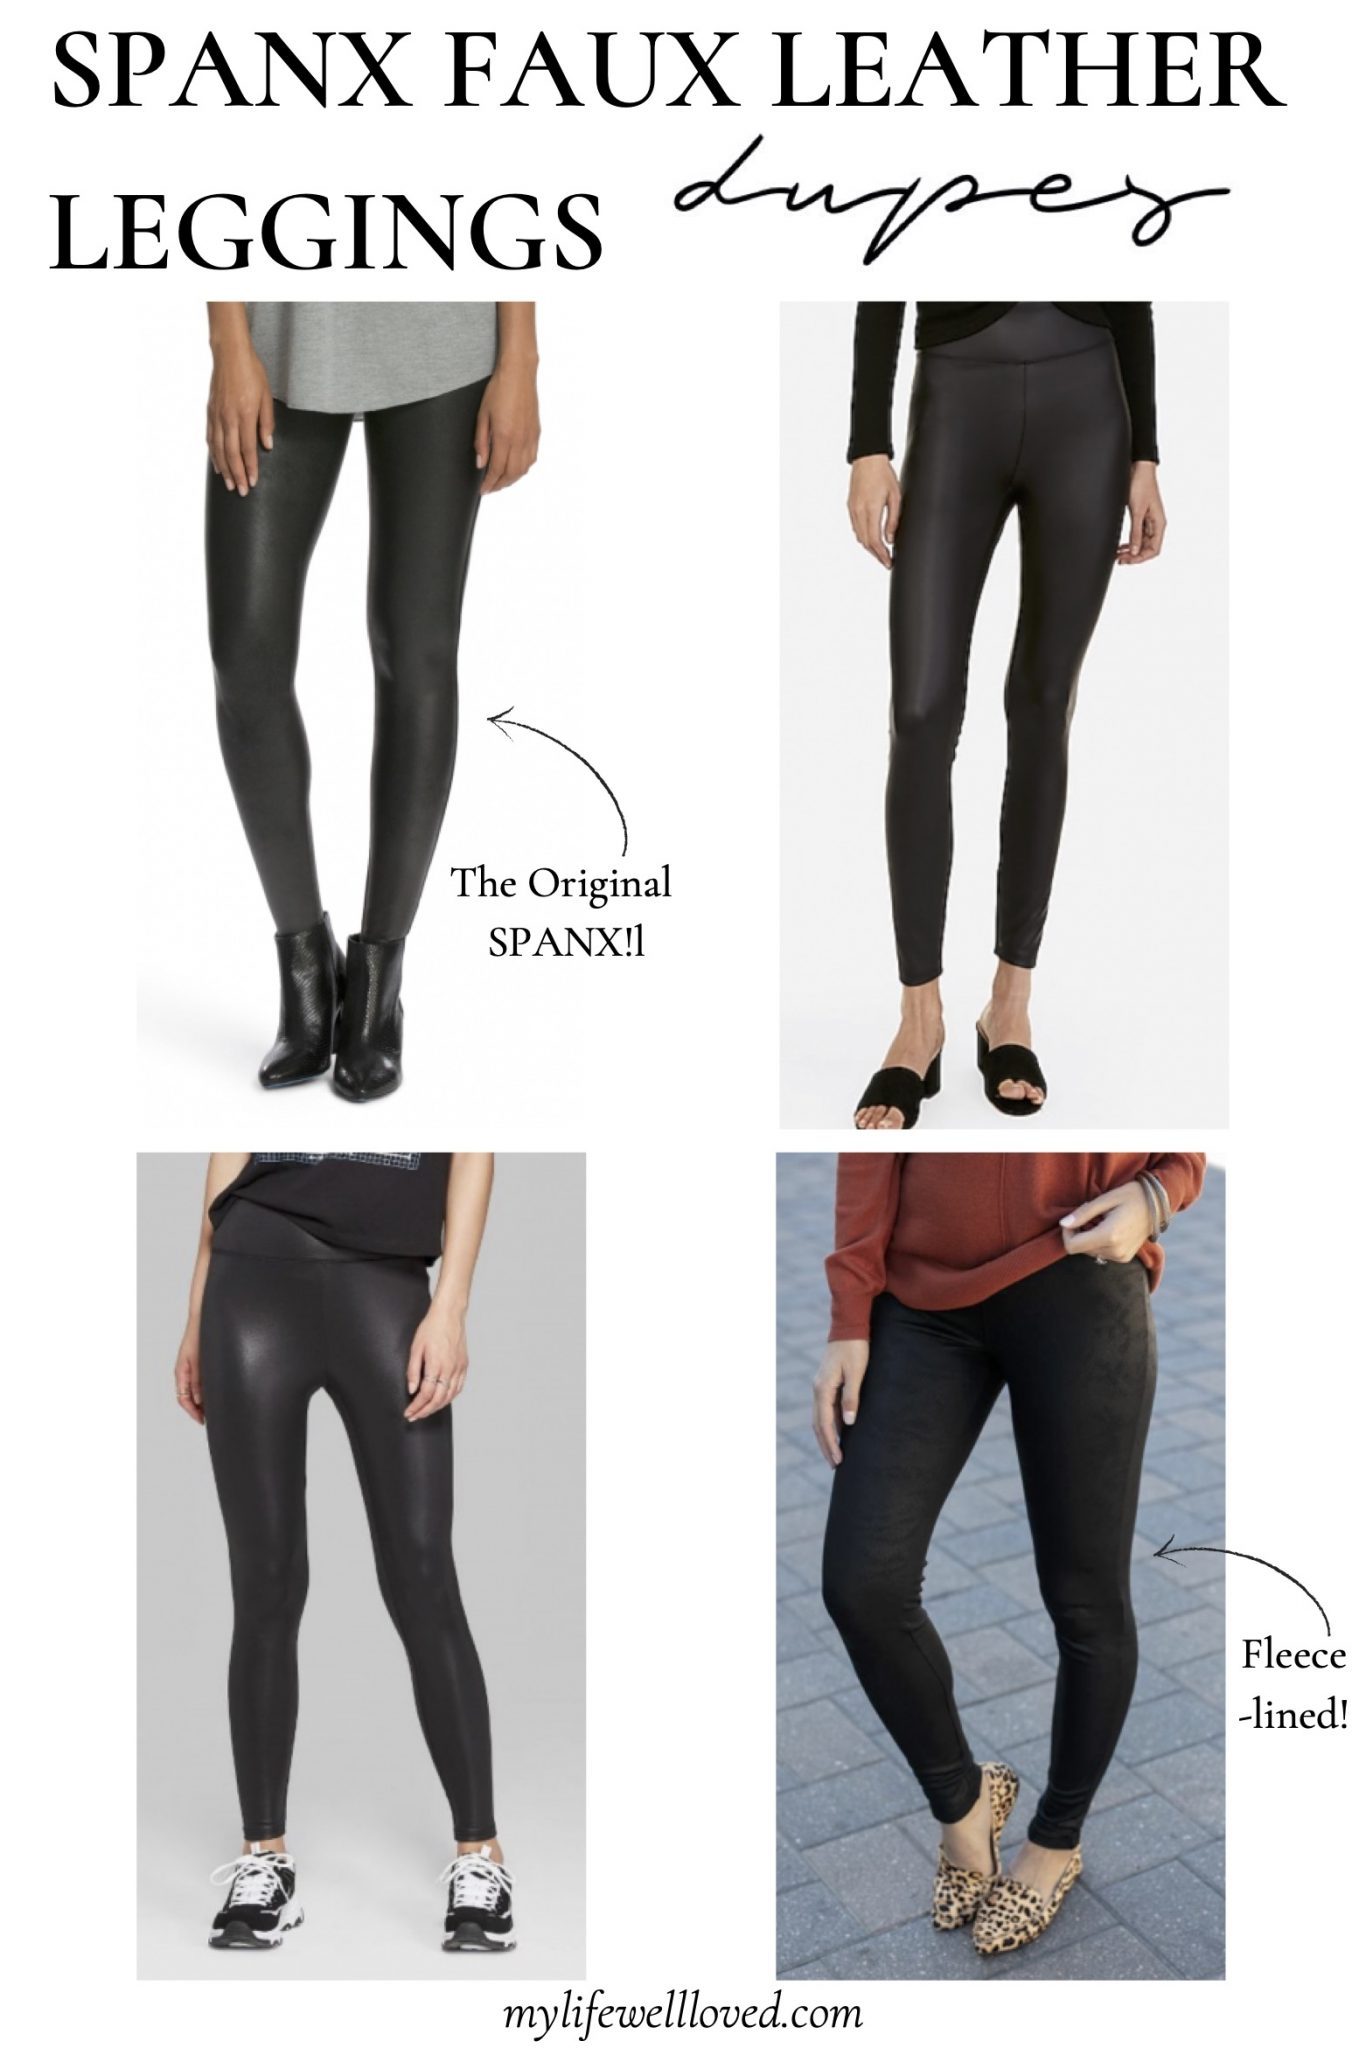 Spanx Faux Leather Leggings Dupes On Amazon - Healthy By Heather Brown